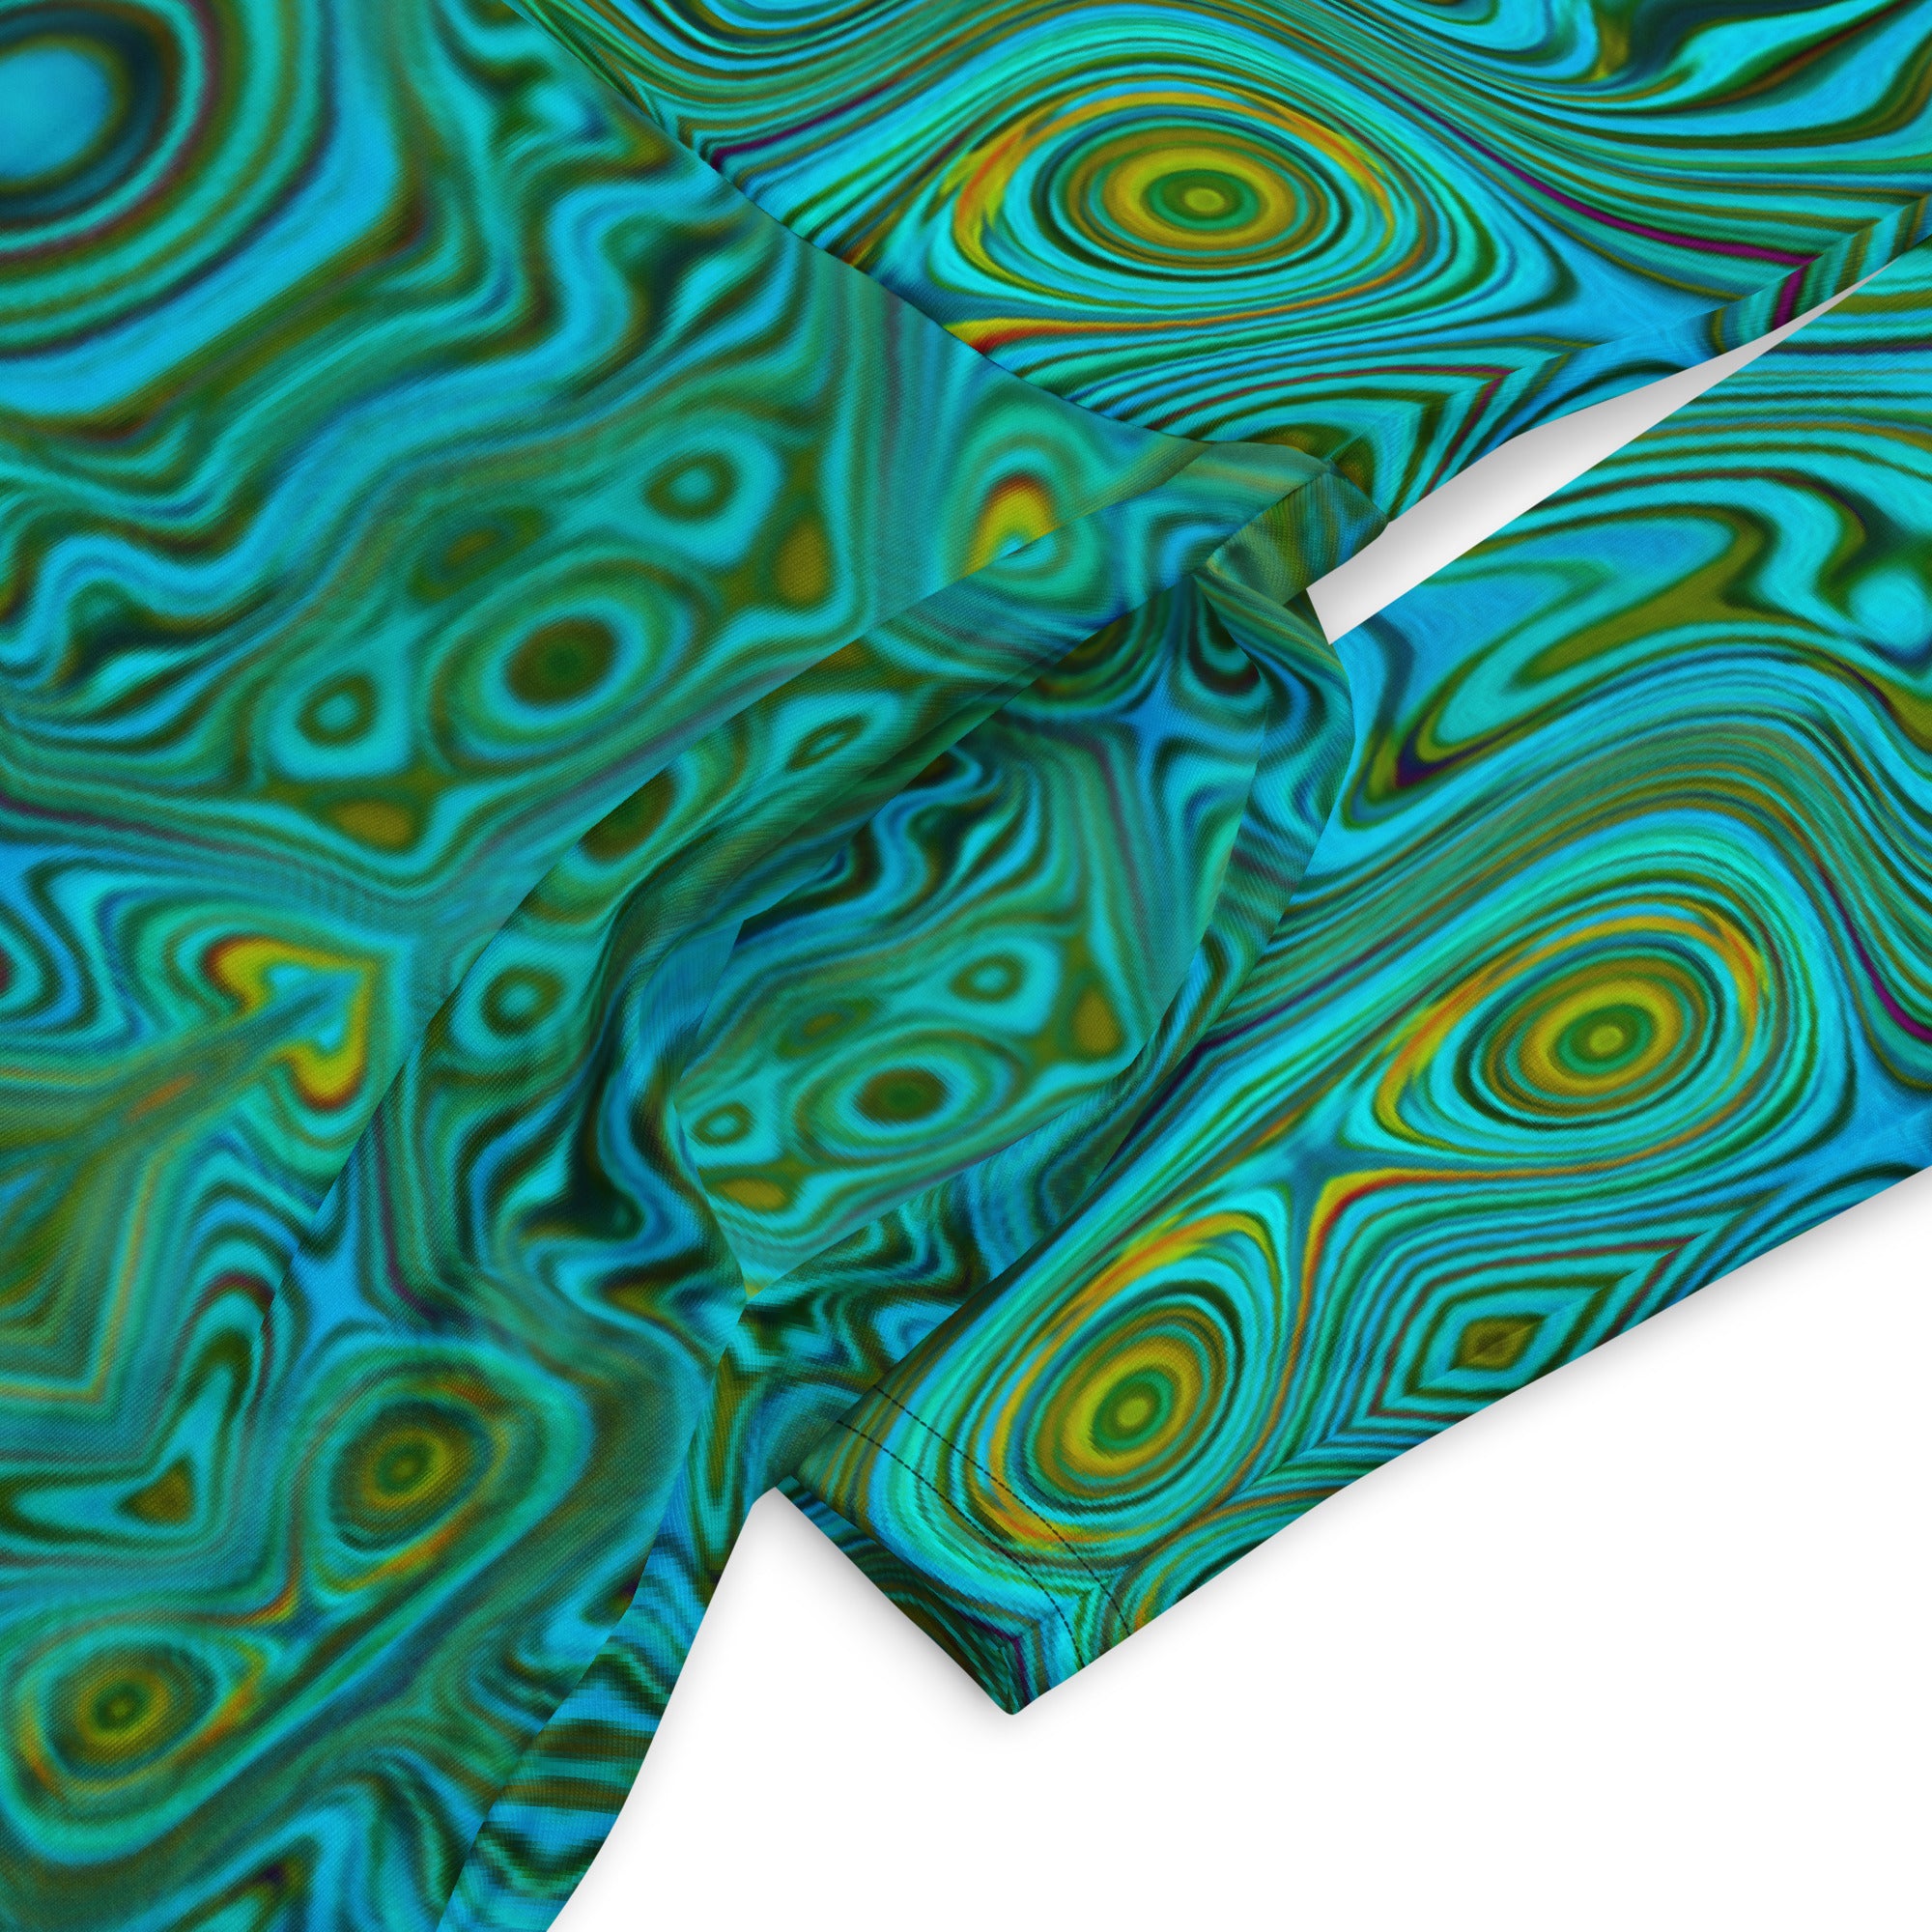 Midi Dress, Trippy Retro Turquoise Chartreuse Abstract Pattern